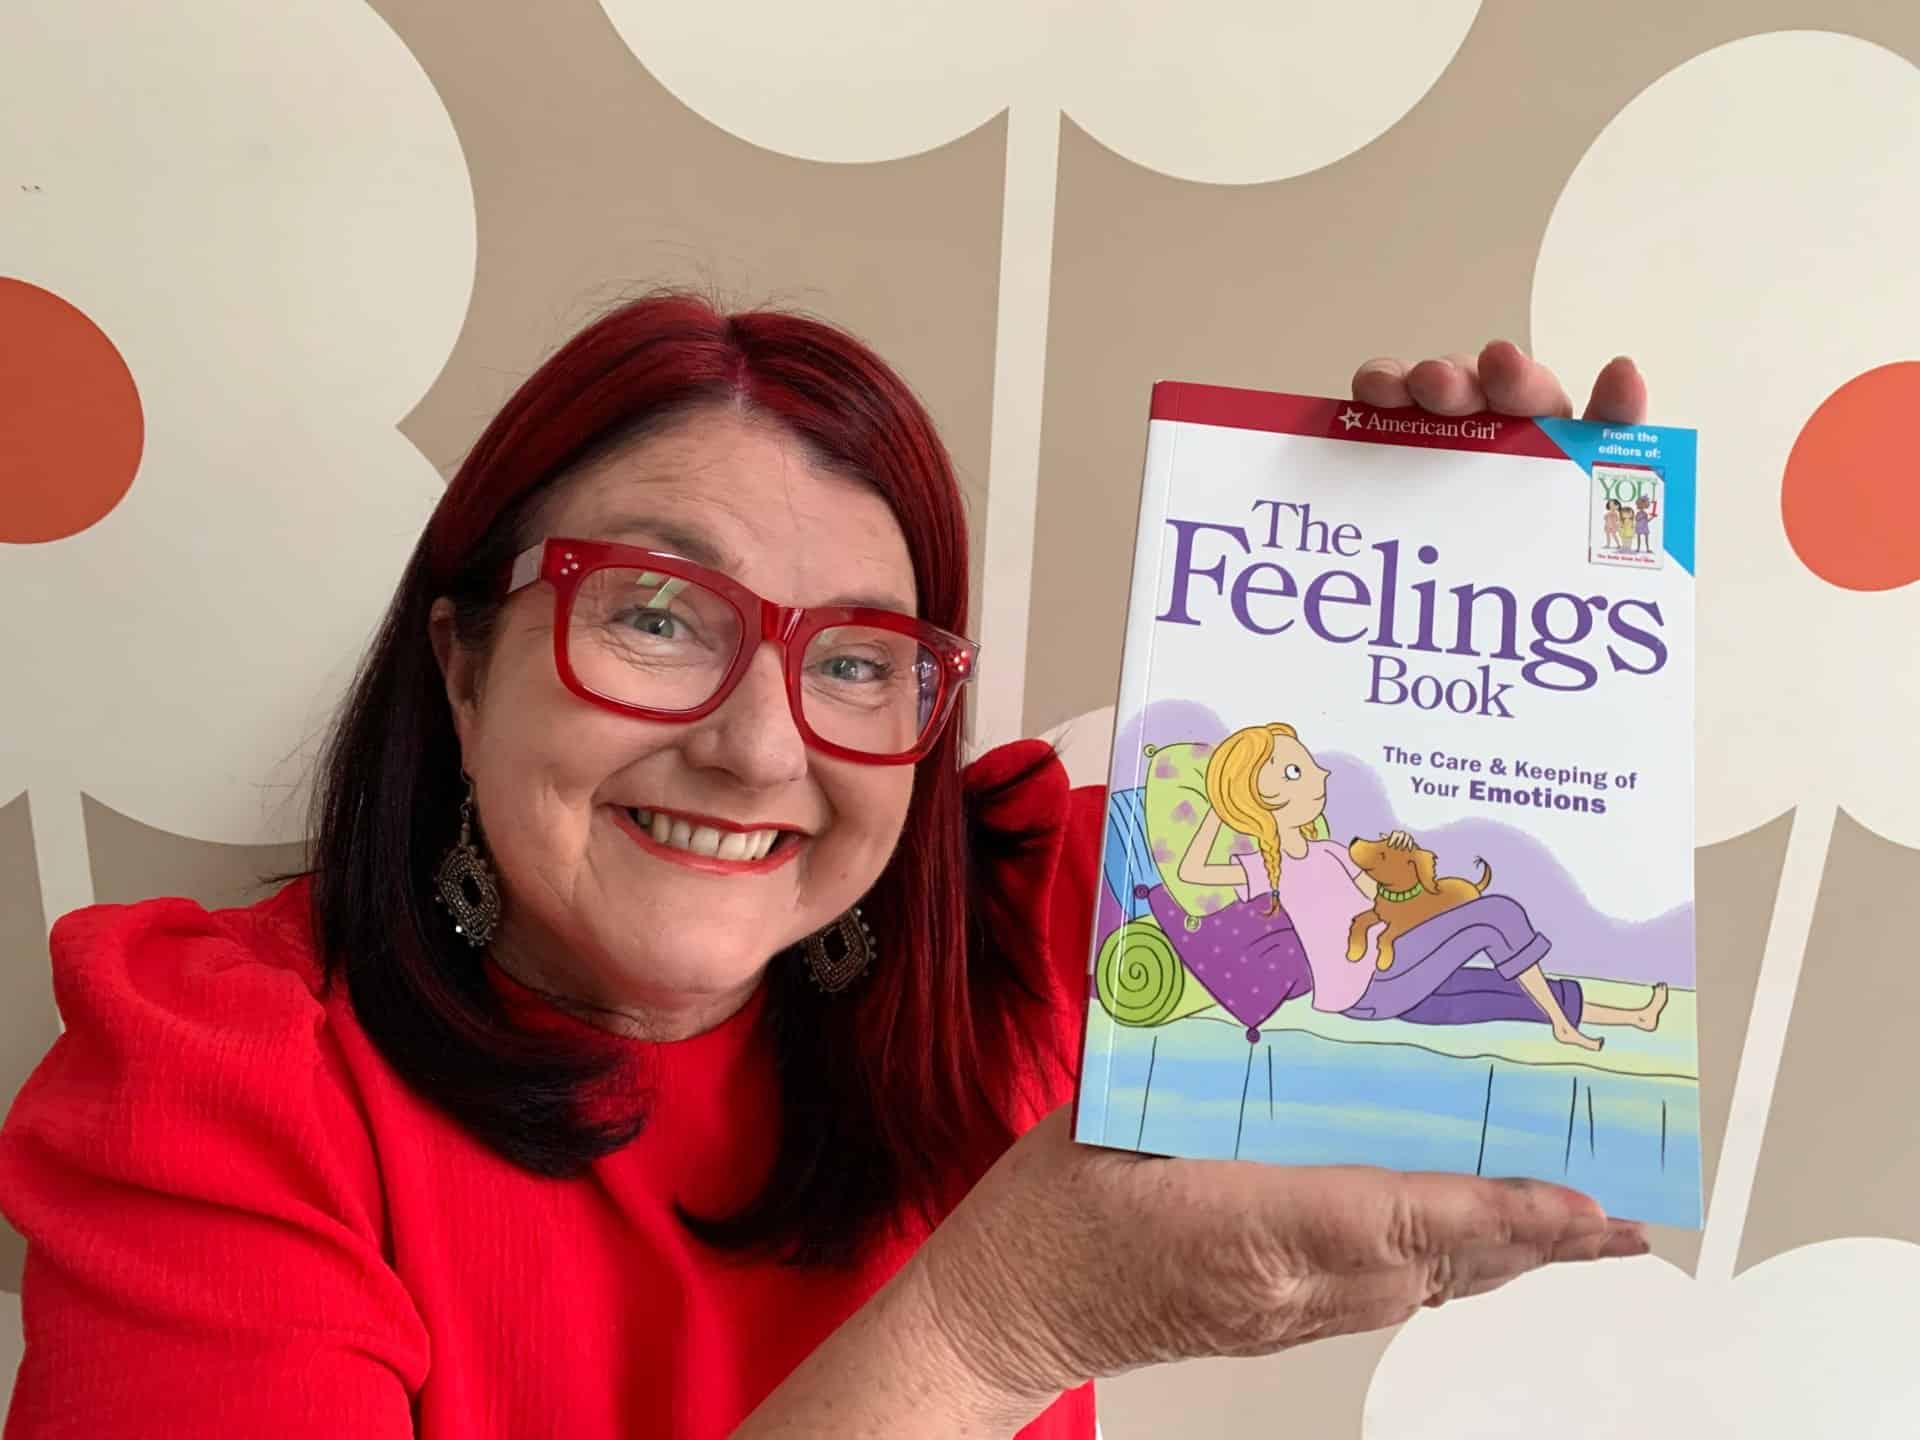 The Feelings Book: The Care & Keeping of Your Emotions - Book review by Rowena Thomas | 'Amazing Me'